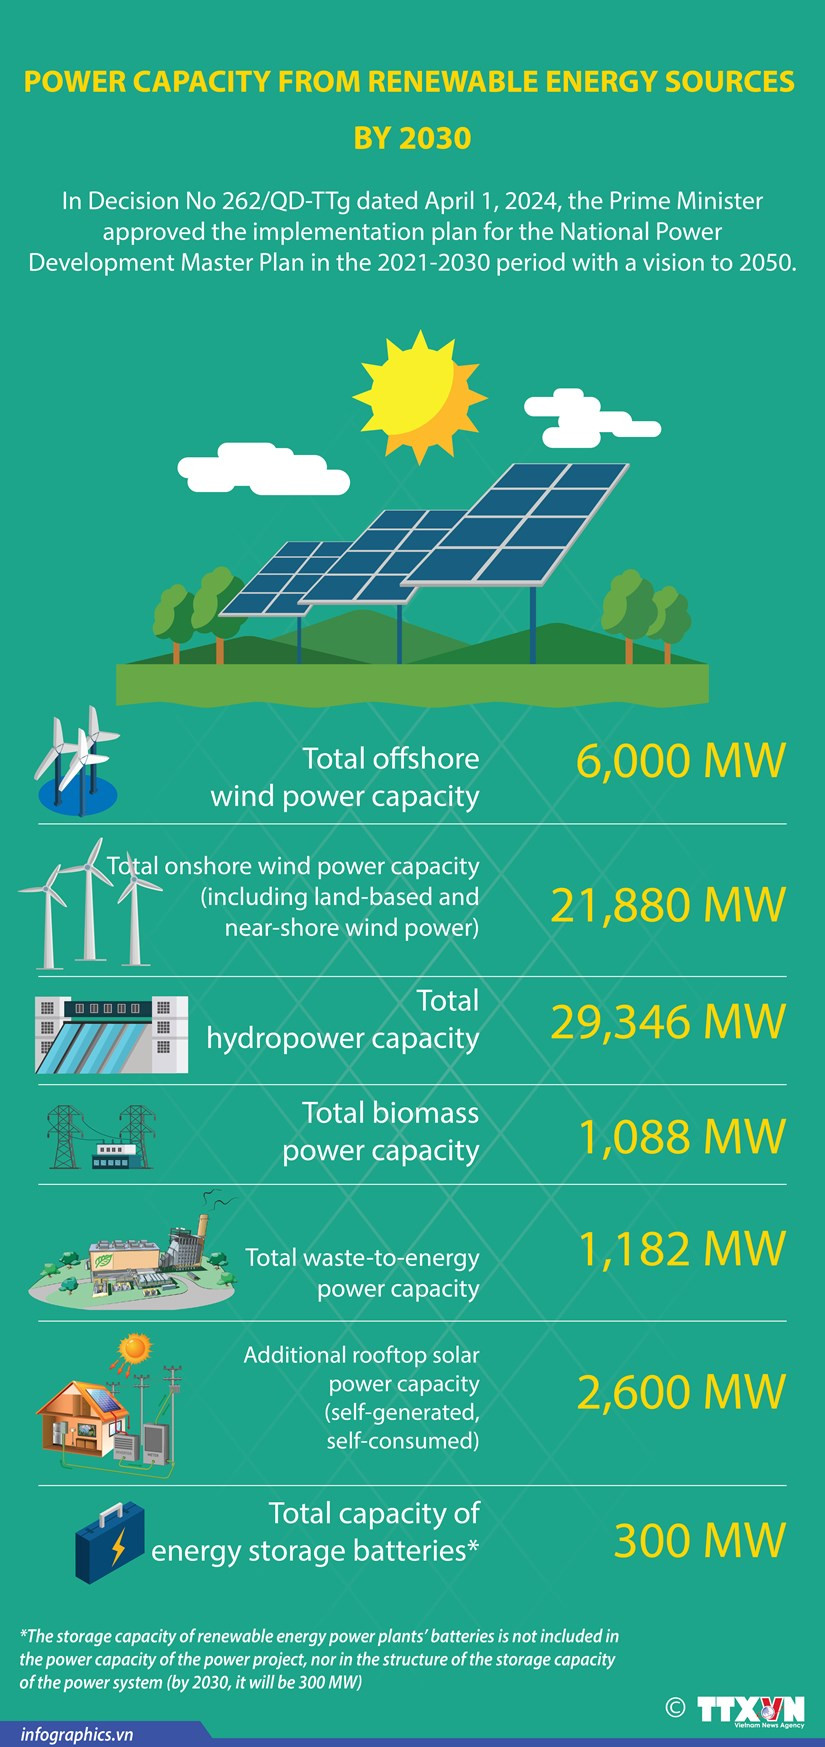 Power capacity from renewable energy sources by 2030 hinh anh 1